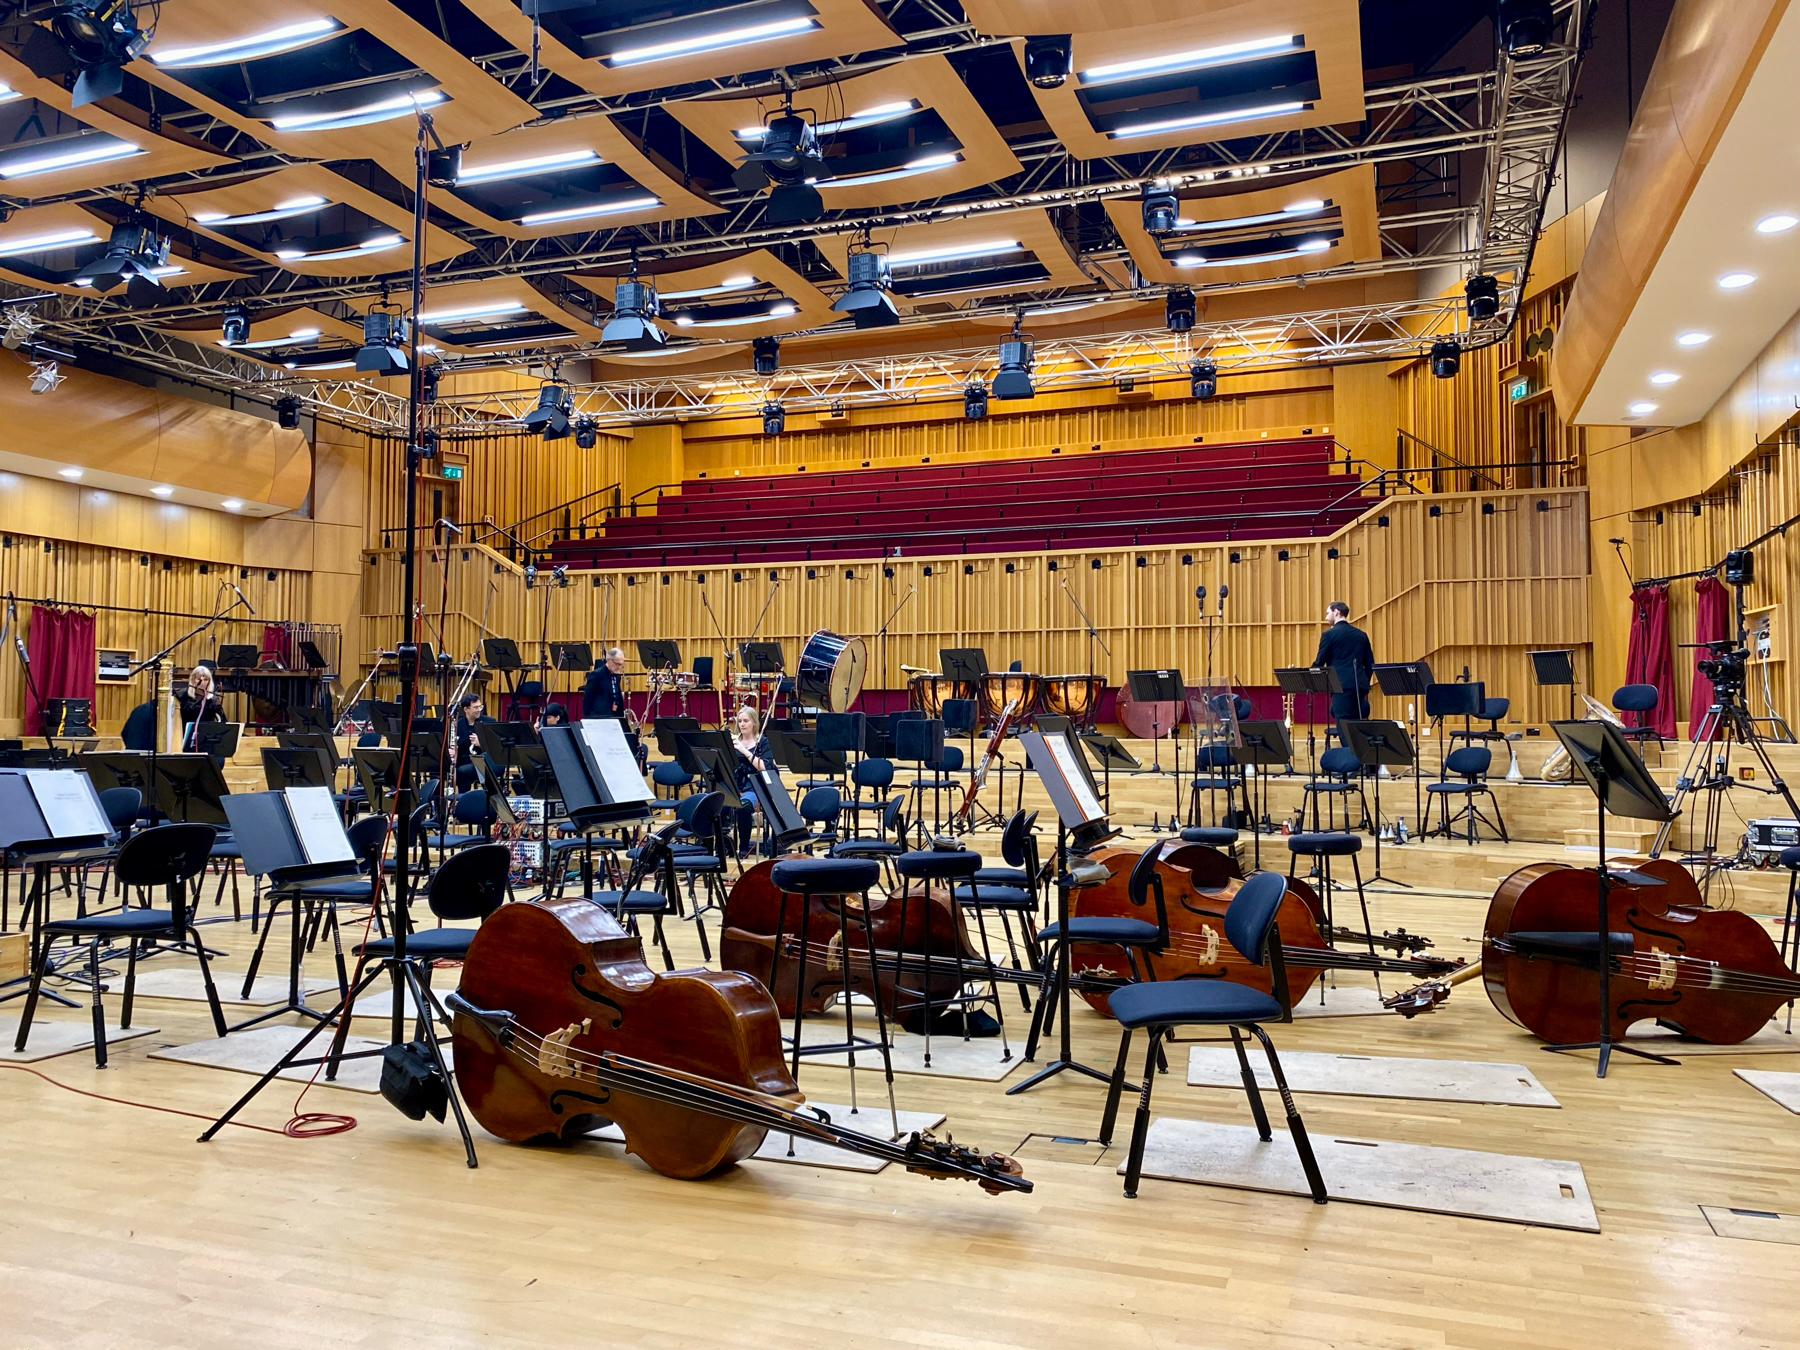 Orchestra setup with chairs, sheet music stands, and various instruments including violins, cellos, and basses on a concert hall stage with a wooden interior and modern lighting. Few musicians are present, suggesting a rehearsal break or preparation for a performance